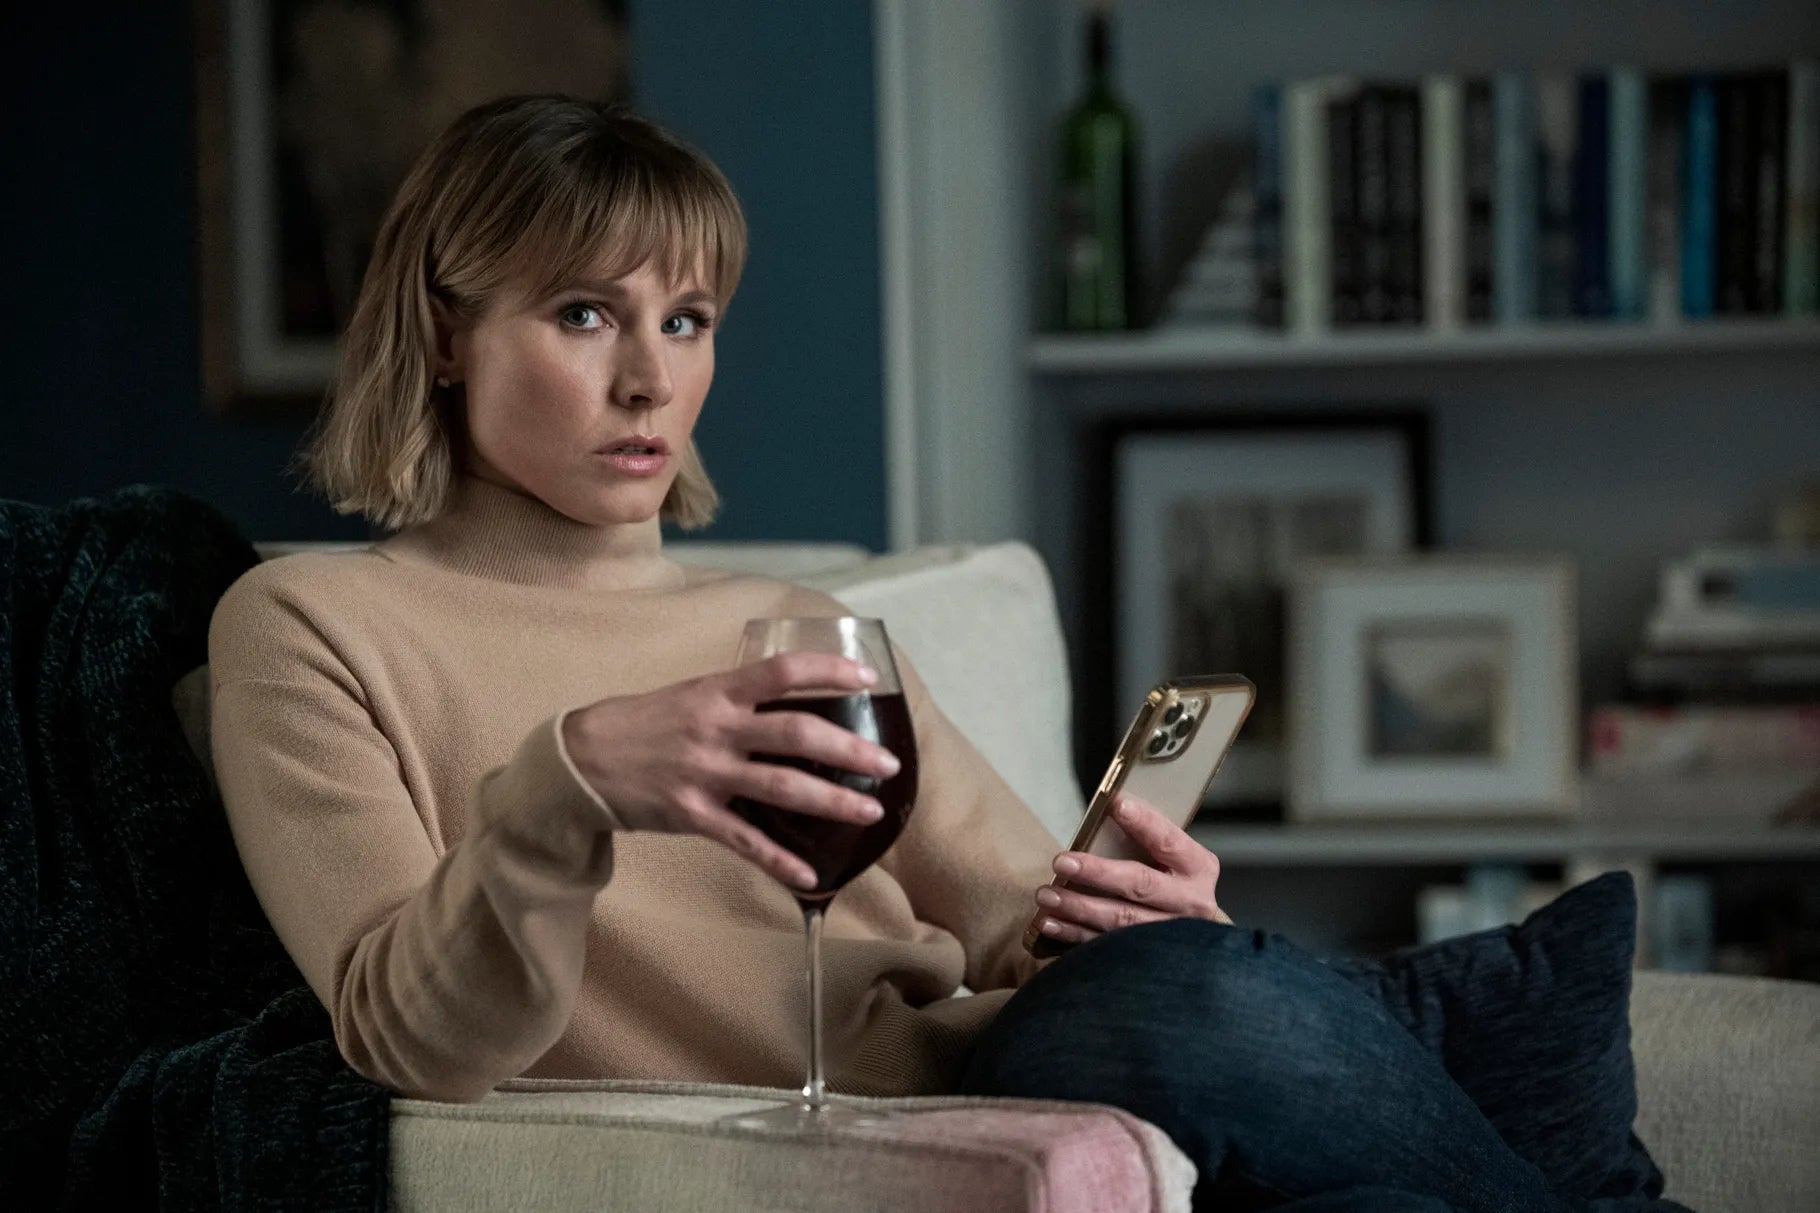 Bell sitting in an armchair with her phone in one hand and an overfull glass of red wine in the other hand as she looks to the side warily in a scene from the show